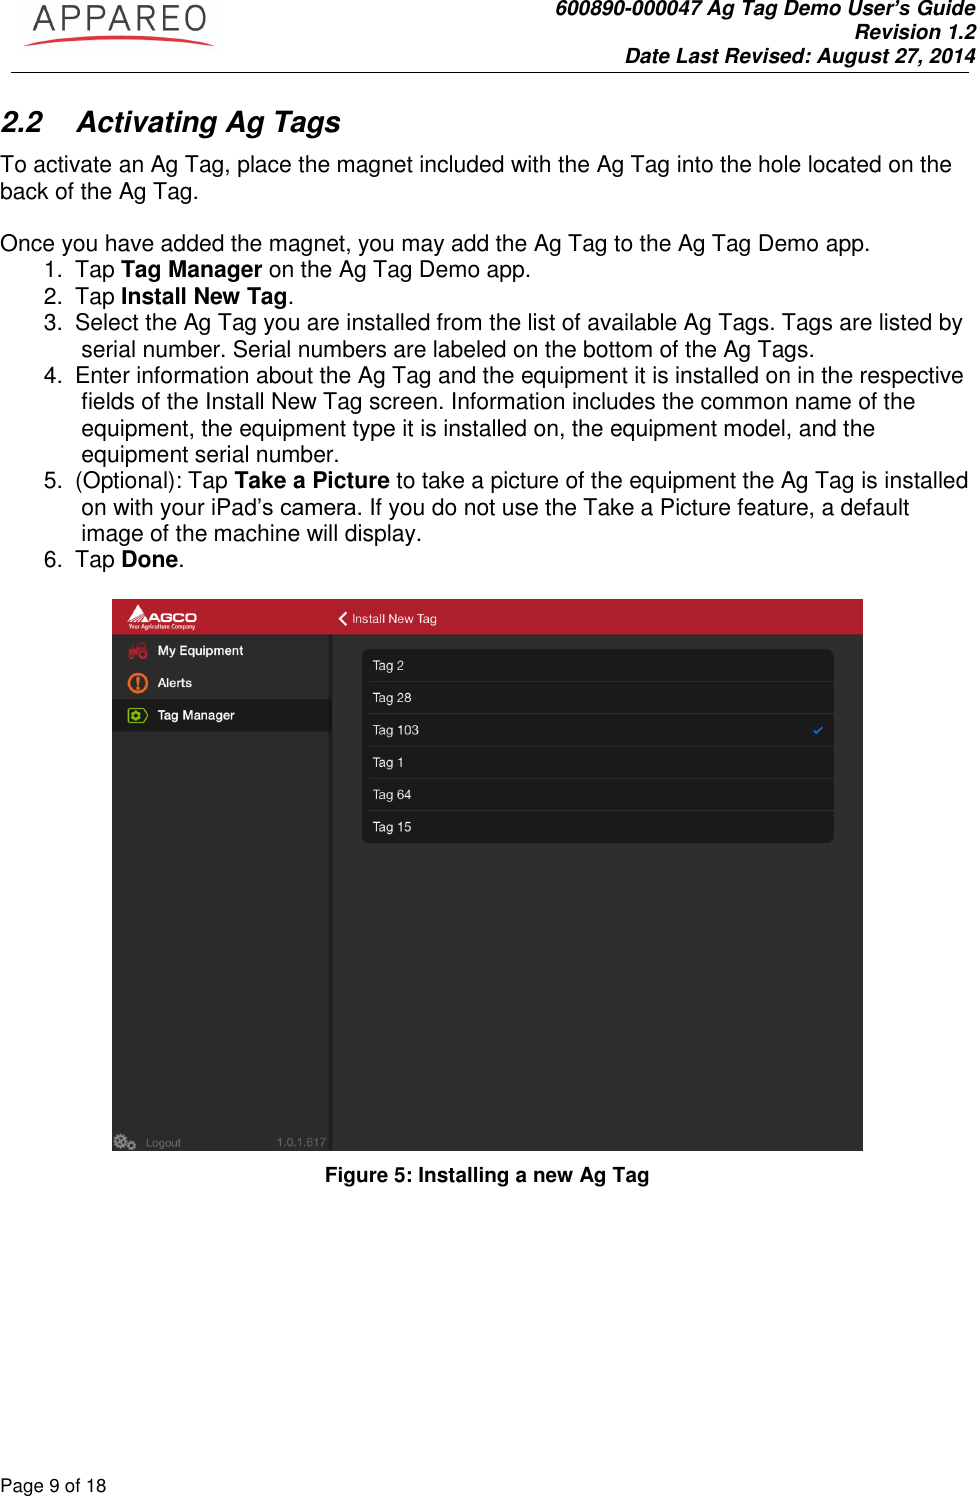               600890-000047 Ag Tag Demo User’s Guide   Revision 1.2 Date Last Revised: August 27, 2014 Page 9 of 18       2.2  Activating Ag Tags To activate an Ag Tag, place the magnet included with the Ag Tag into the hole located on the back of the Ag Tag.   Once you have added the magnet, you may add the Ag Tag to the Ag Tag Demo app.  1.  Tap Tag Manager on the Ag Tag Demo app. 2.  Tap Install New Tag.  3.  Select the Ag Tag you are installed from the list of available Ag Tags. Tags are listed by serial number. Serial numbers are labeled on the bottom of the Ag Tags.  4.  Enter information about the Ag Tag and the equipment it is installed on in the respective fields of the Install New Tag screen. Information includes the common name of the equipment, the equipment type it is installed on, the equipment model, and the equipment serial number.  5.  (Optional): Tap Take a Picture to take a picture of the equipment the Ag Tag is installed on with your iPad’s camera. If you do not use the Take a Picture feature, a default image of the machine will display. 6.  Tap Done.    Figure 5: Installing a new Ag Tag 